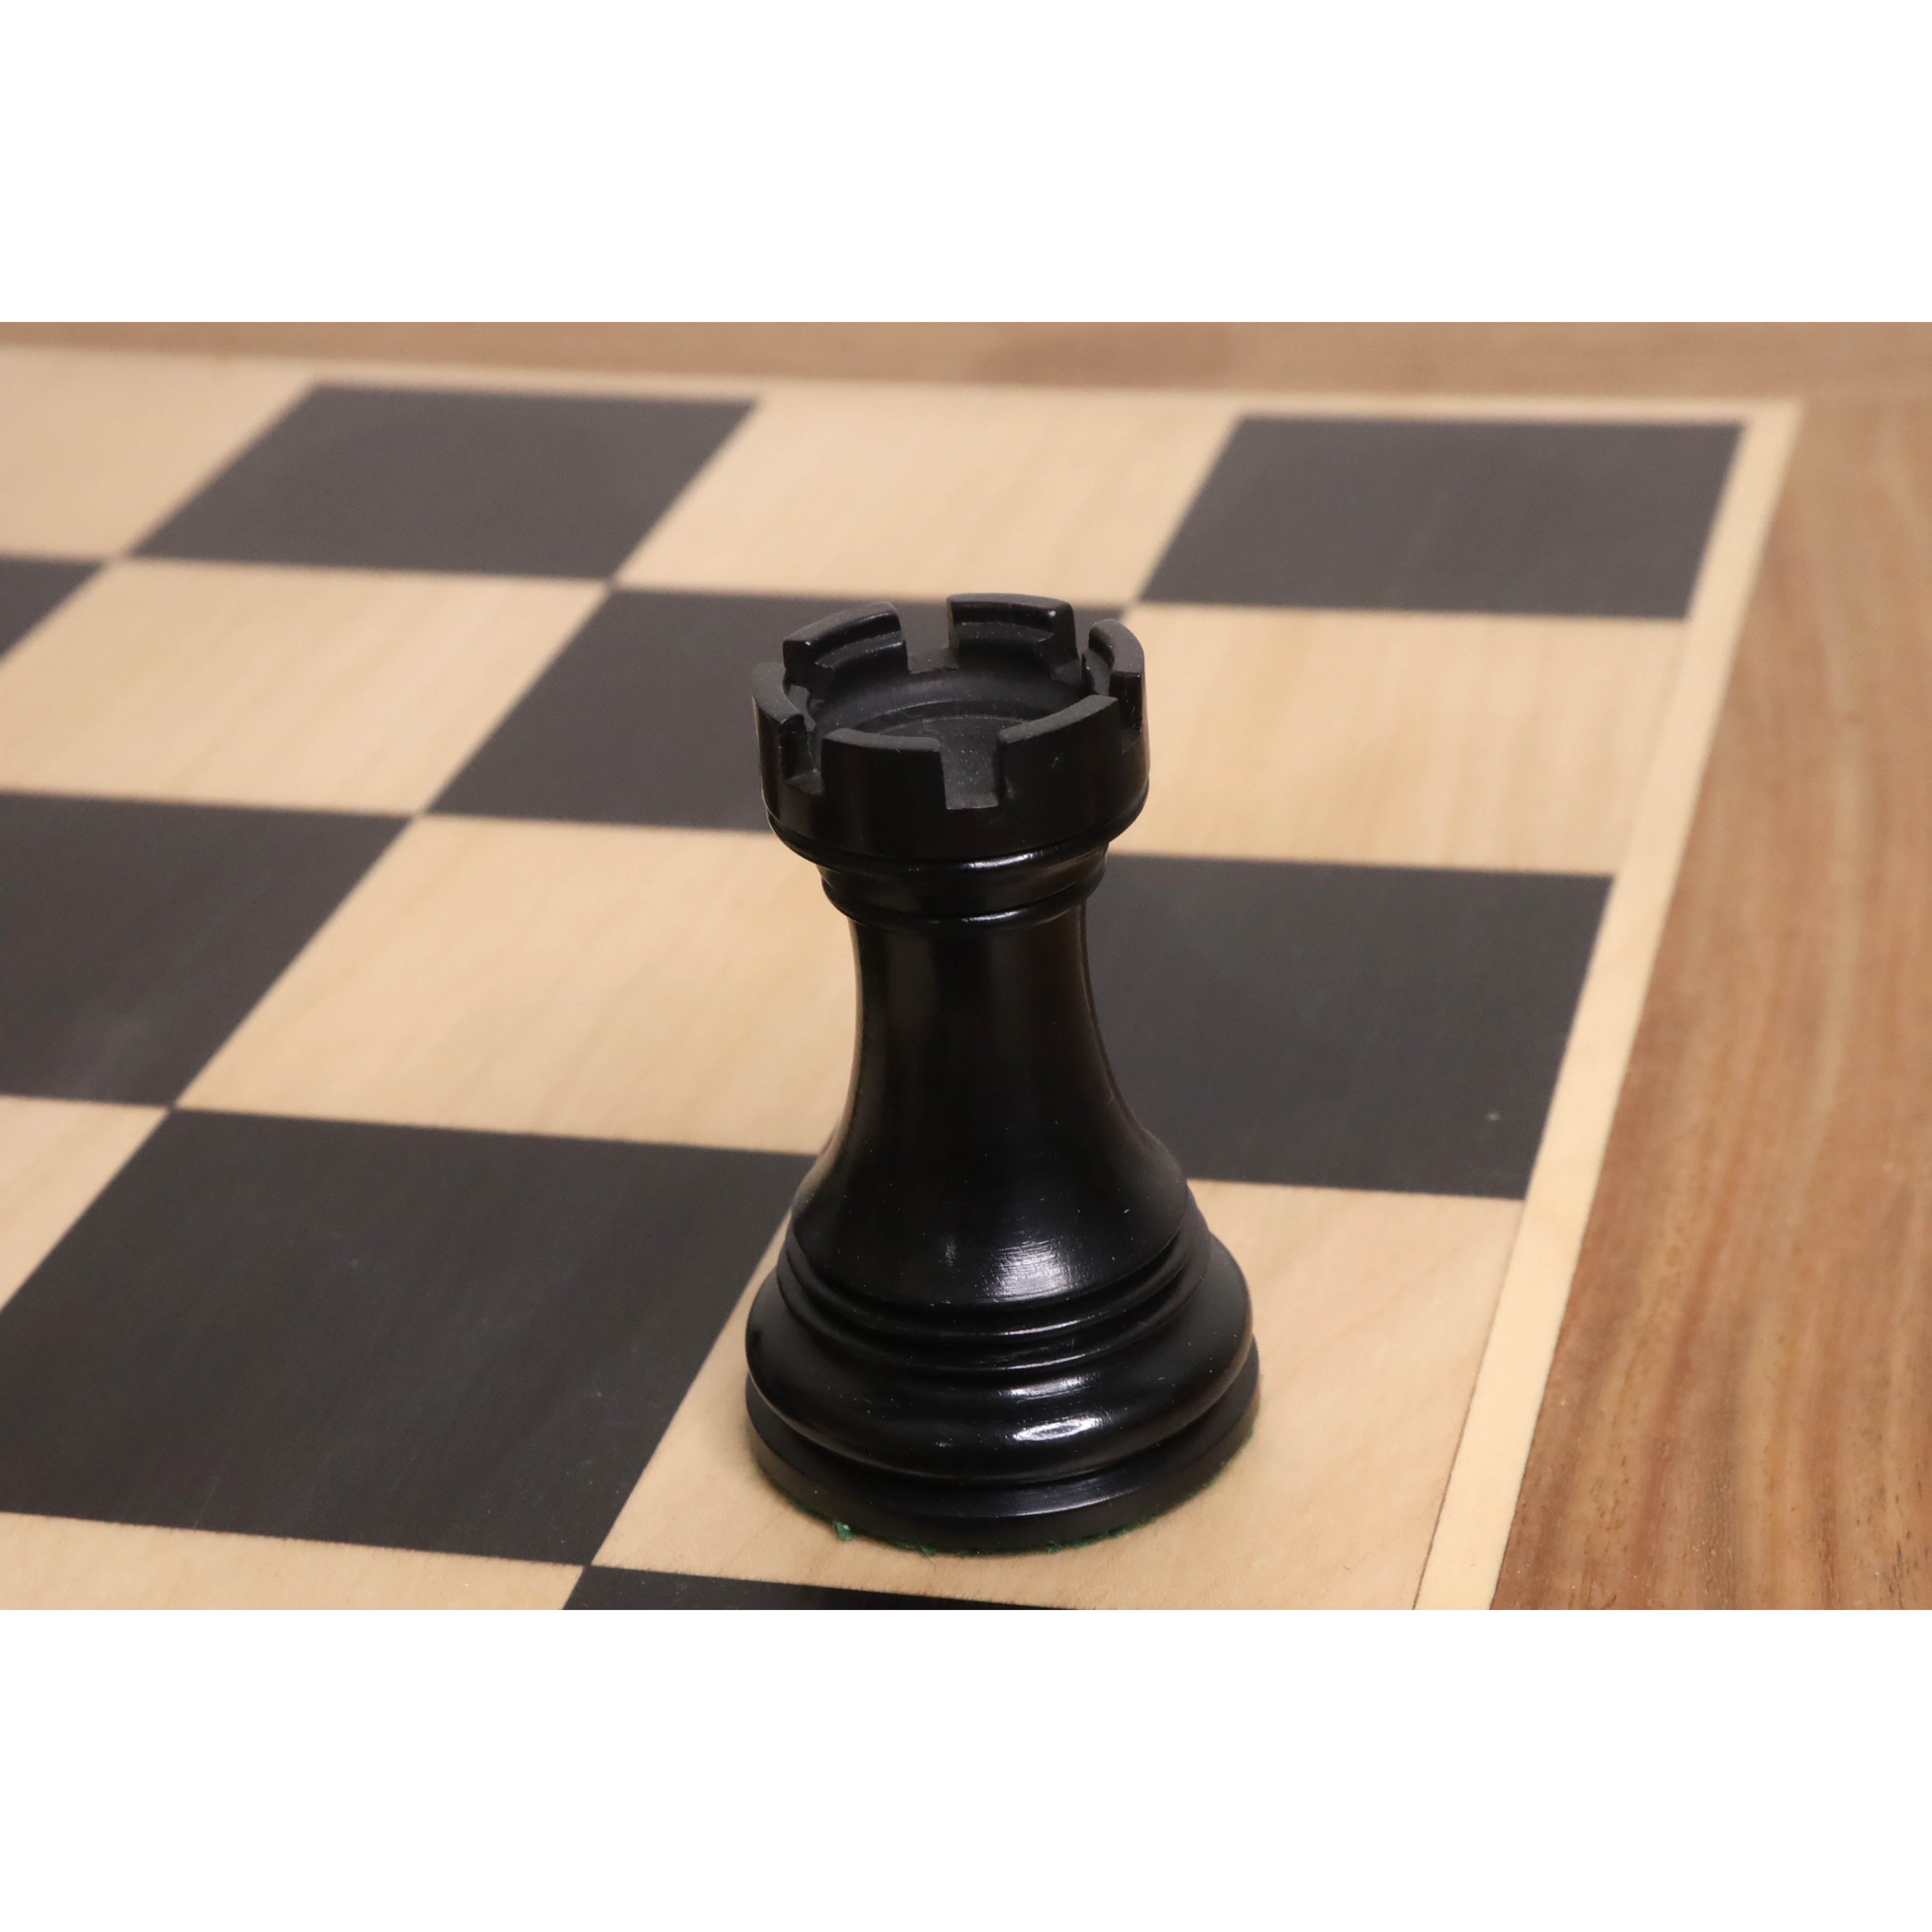 Slightly Imperfect 4.2" Luxury Patton Staunton Chess Pieces Only set - Ebony Wood - Triple Weighted